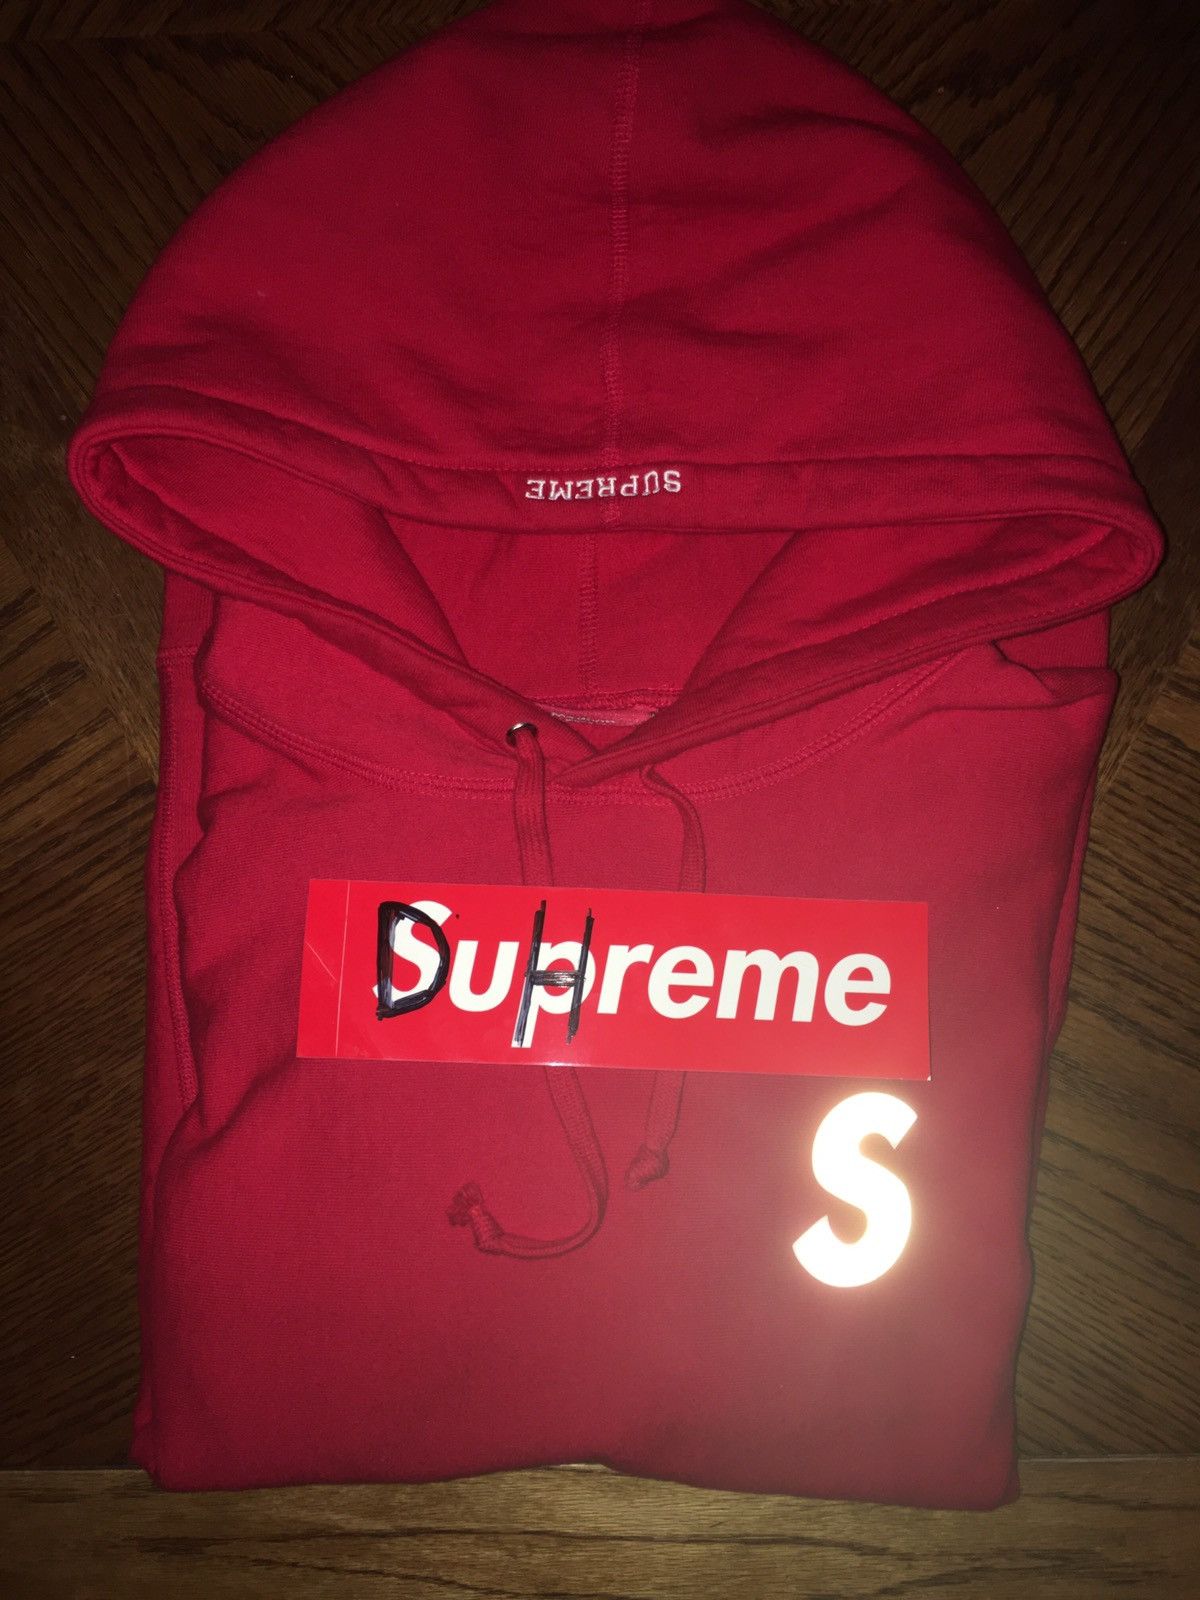 Supreme 3M Reflective S Logo Hoodie - Red Size US M / EU 48-50 / 2 - 1 Preview